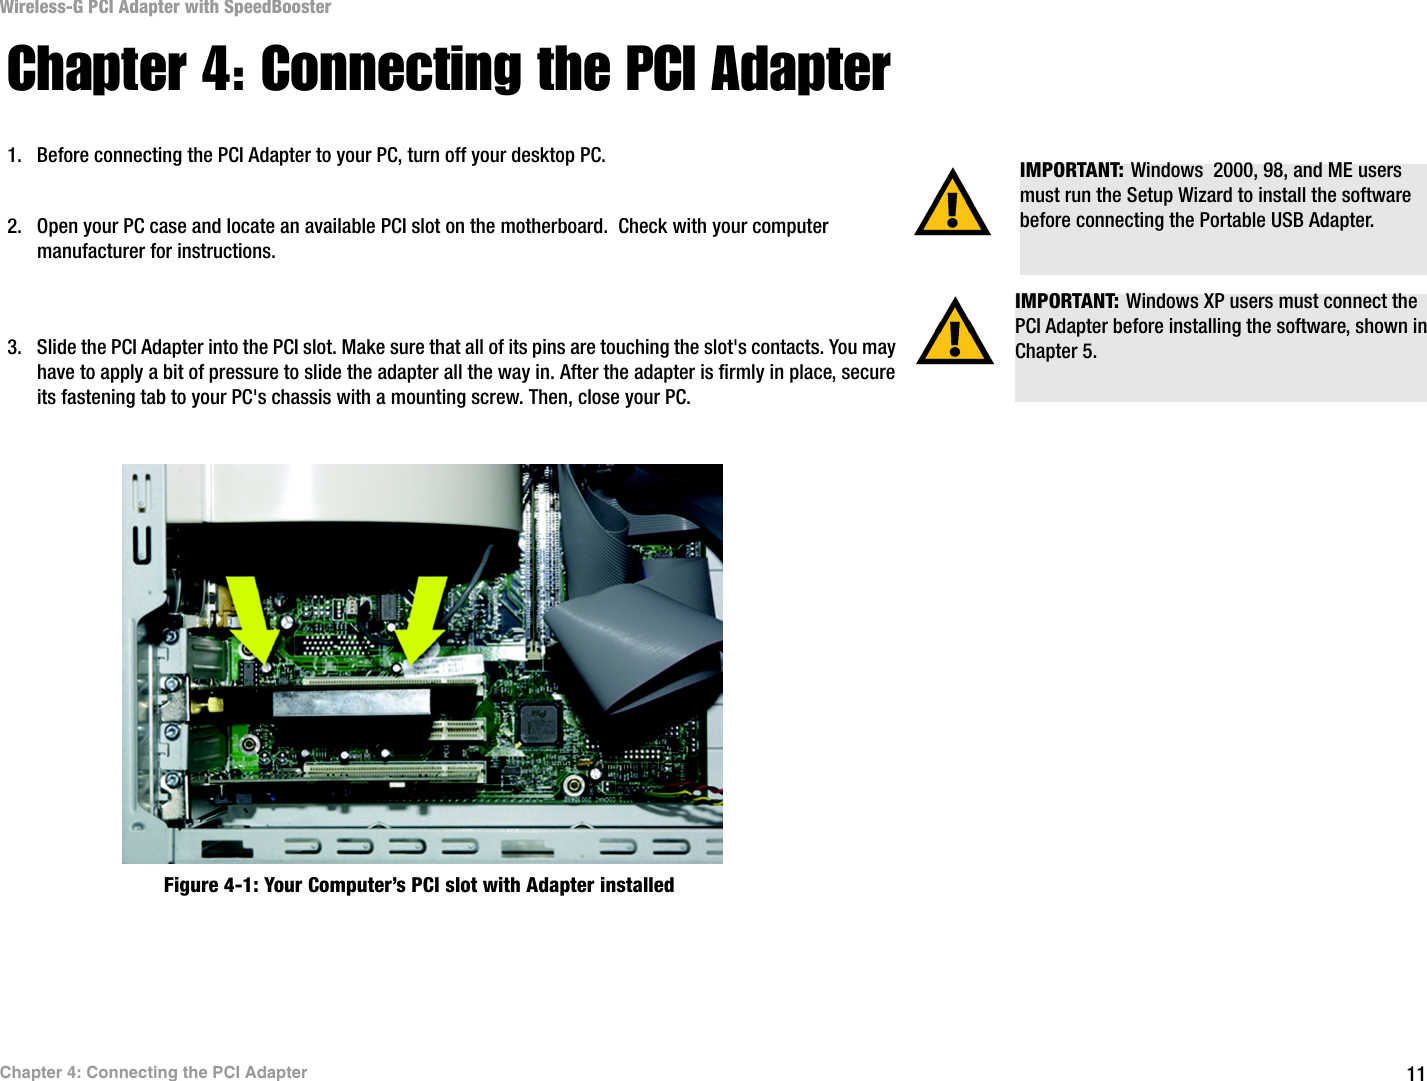 11Chapter 4: Connecting the PCI AdapterWireless-G PCI Adapter with SpeedBoosterChapter 4: Connecting the PCI Adapter1. Before connecting the PCI Adapter to your PC, turn off your desktop PC.  2. Open your PC case and locate an available PCI slot on the motherboard.  Check with your computer manufacturer for instructions. 3. Slide the PCI Adapter into the PCI slot. Make sure that all of its pins are touching the slot&apos;s contacts. You may have to apply a bit of pressure to slide the adapter all the way in. After the adapter is firmly in place, secure its fastening tab to your PC&apos;s chassis with a mounting screw. Then, close your PC. IMPORTANT: Windows XP users must connect the PCI Adapter before installing the software, shown in Chapter 5.IMPORTANT: Windows  2000, 98, and ME users must run the Setup Wizard to install the software before connecting the Portable USB Adapter.Figure 4-1: Your Computer’s PCI slot with Adapter installed